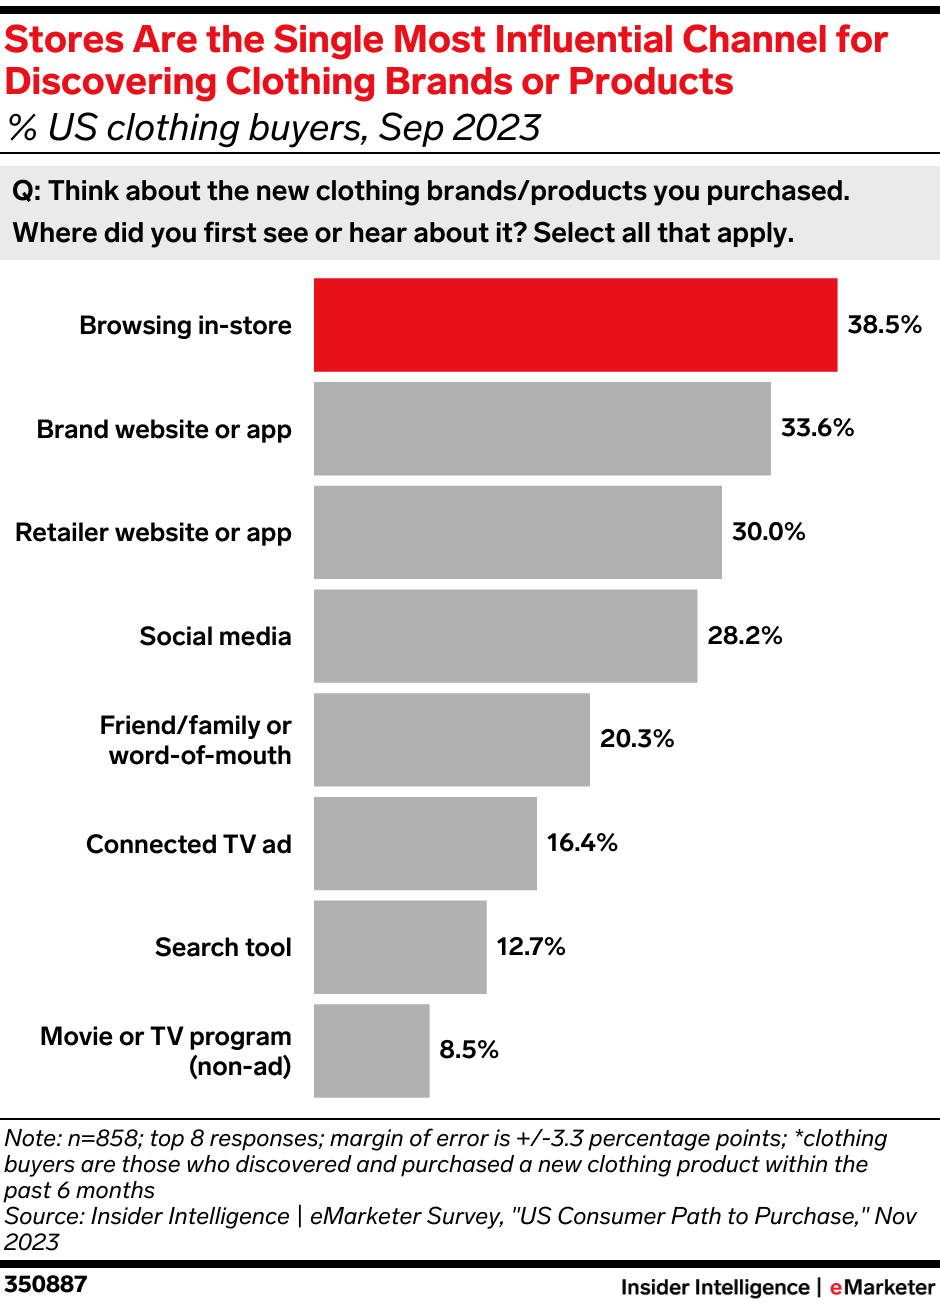 Stores Are the Single Most Influential Channel for Discovering Clothing Brands or Products 